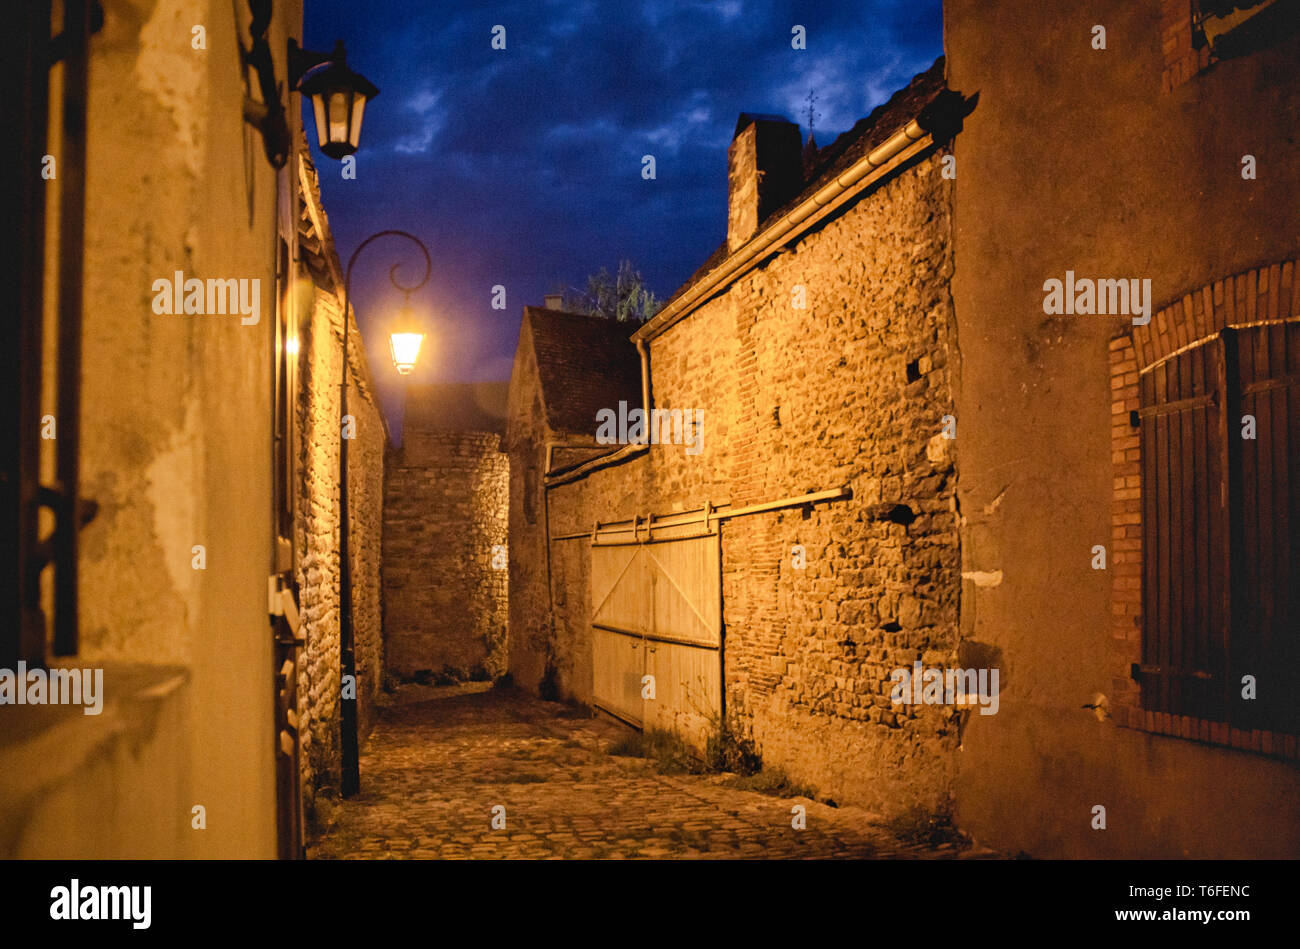 Castle street by night lit by lamps Stock Photo